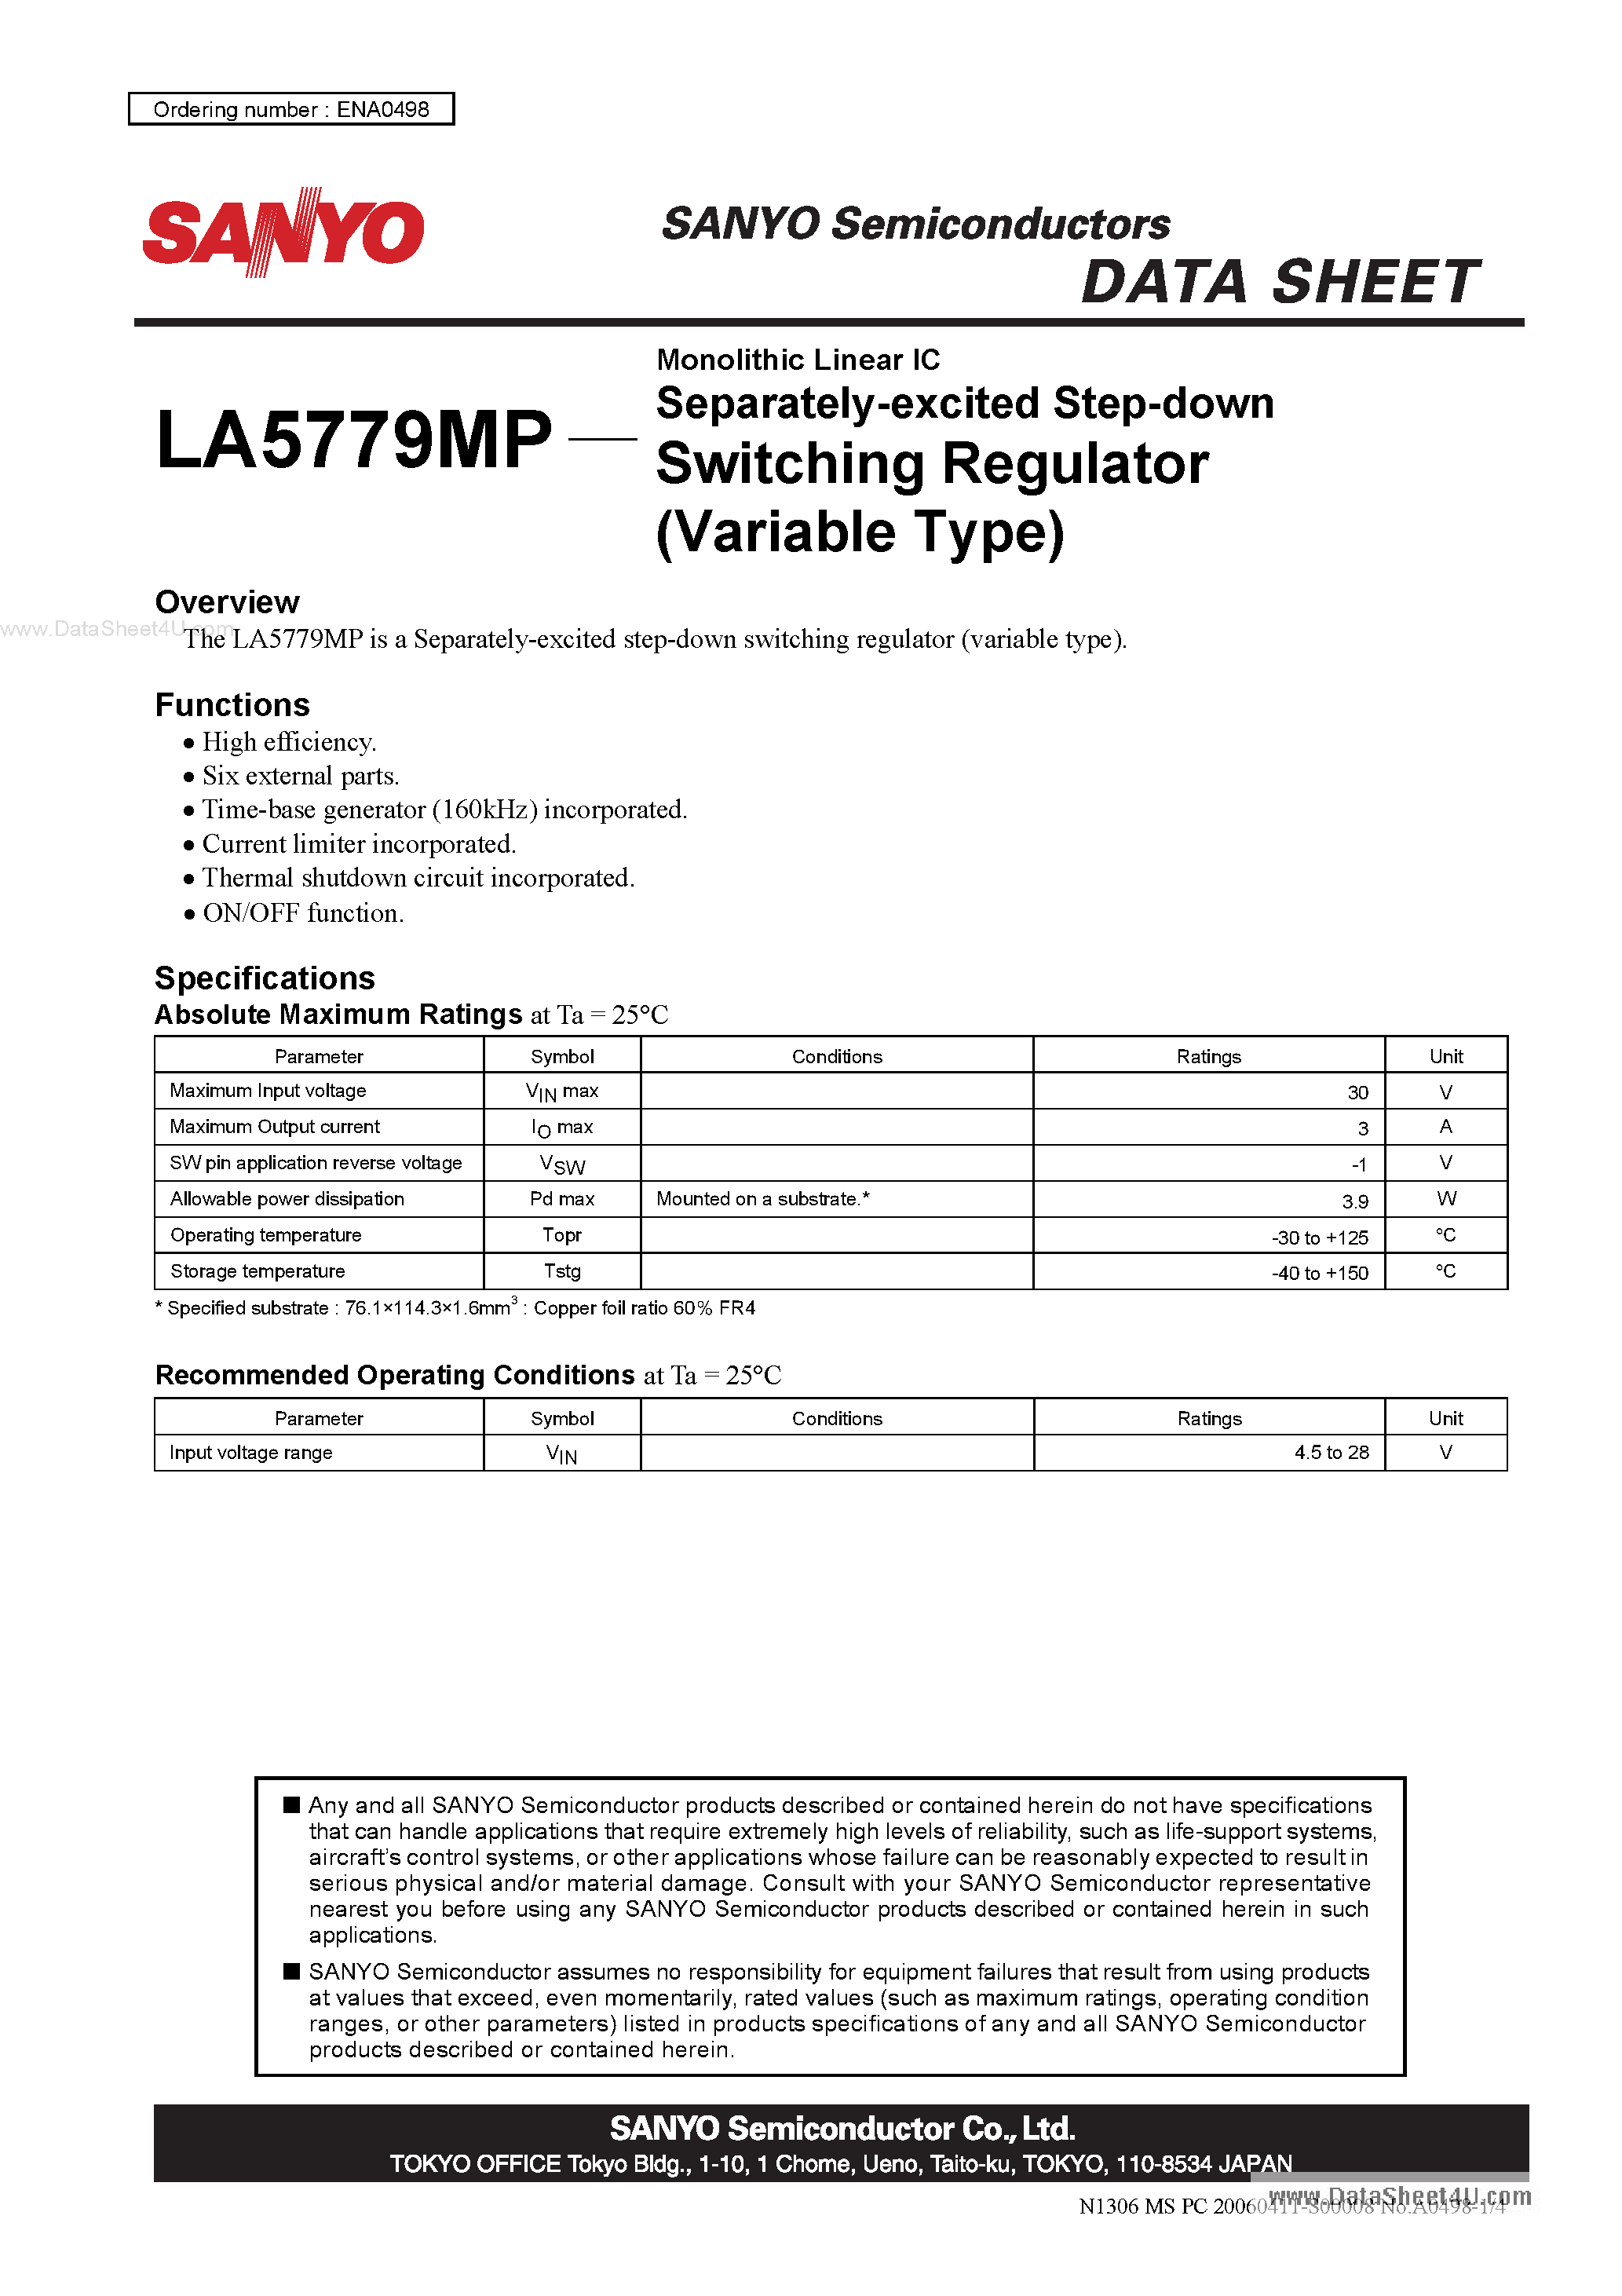 Datasheet LA5779MP - Monolithic Linear IC Separately-excited Step-down Switching Regulator page 1